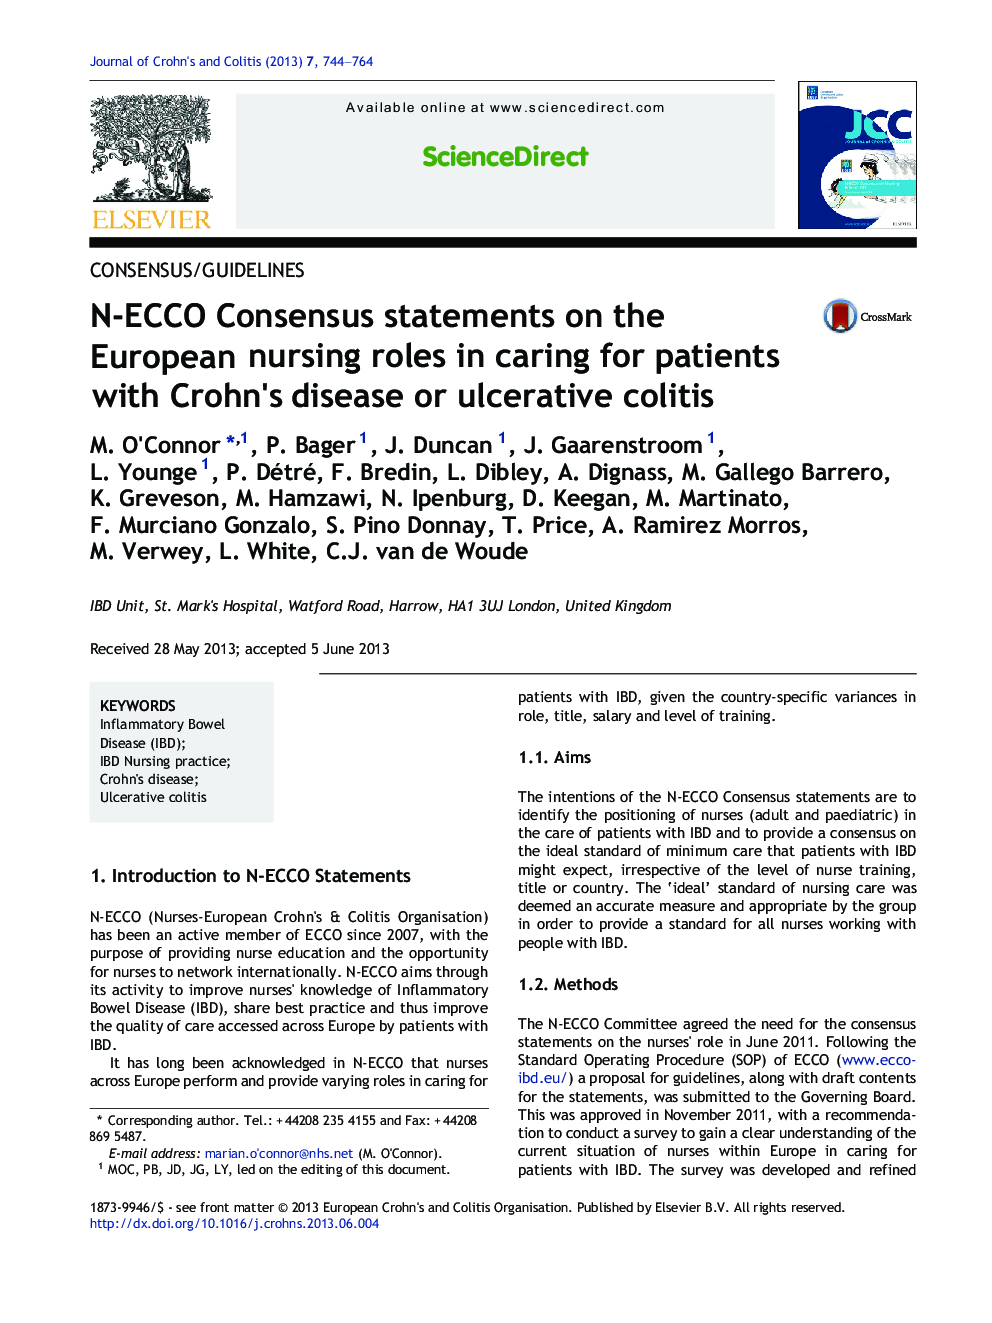 N-ECCO Consensus statements on the European nursing roles in caring for patients with Crohn's disease or ulcerative colitis